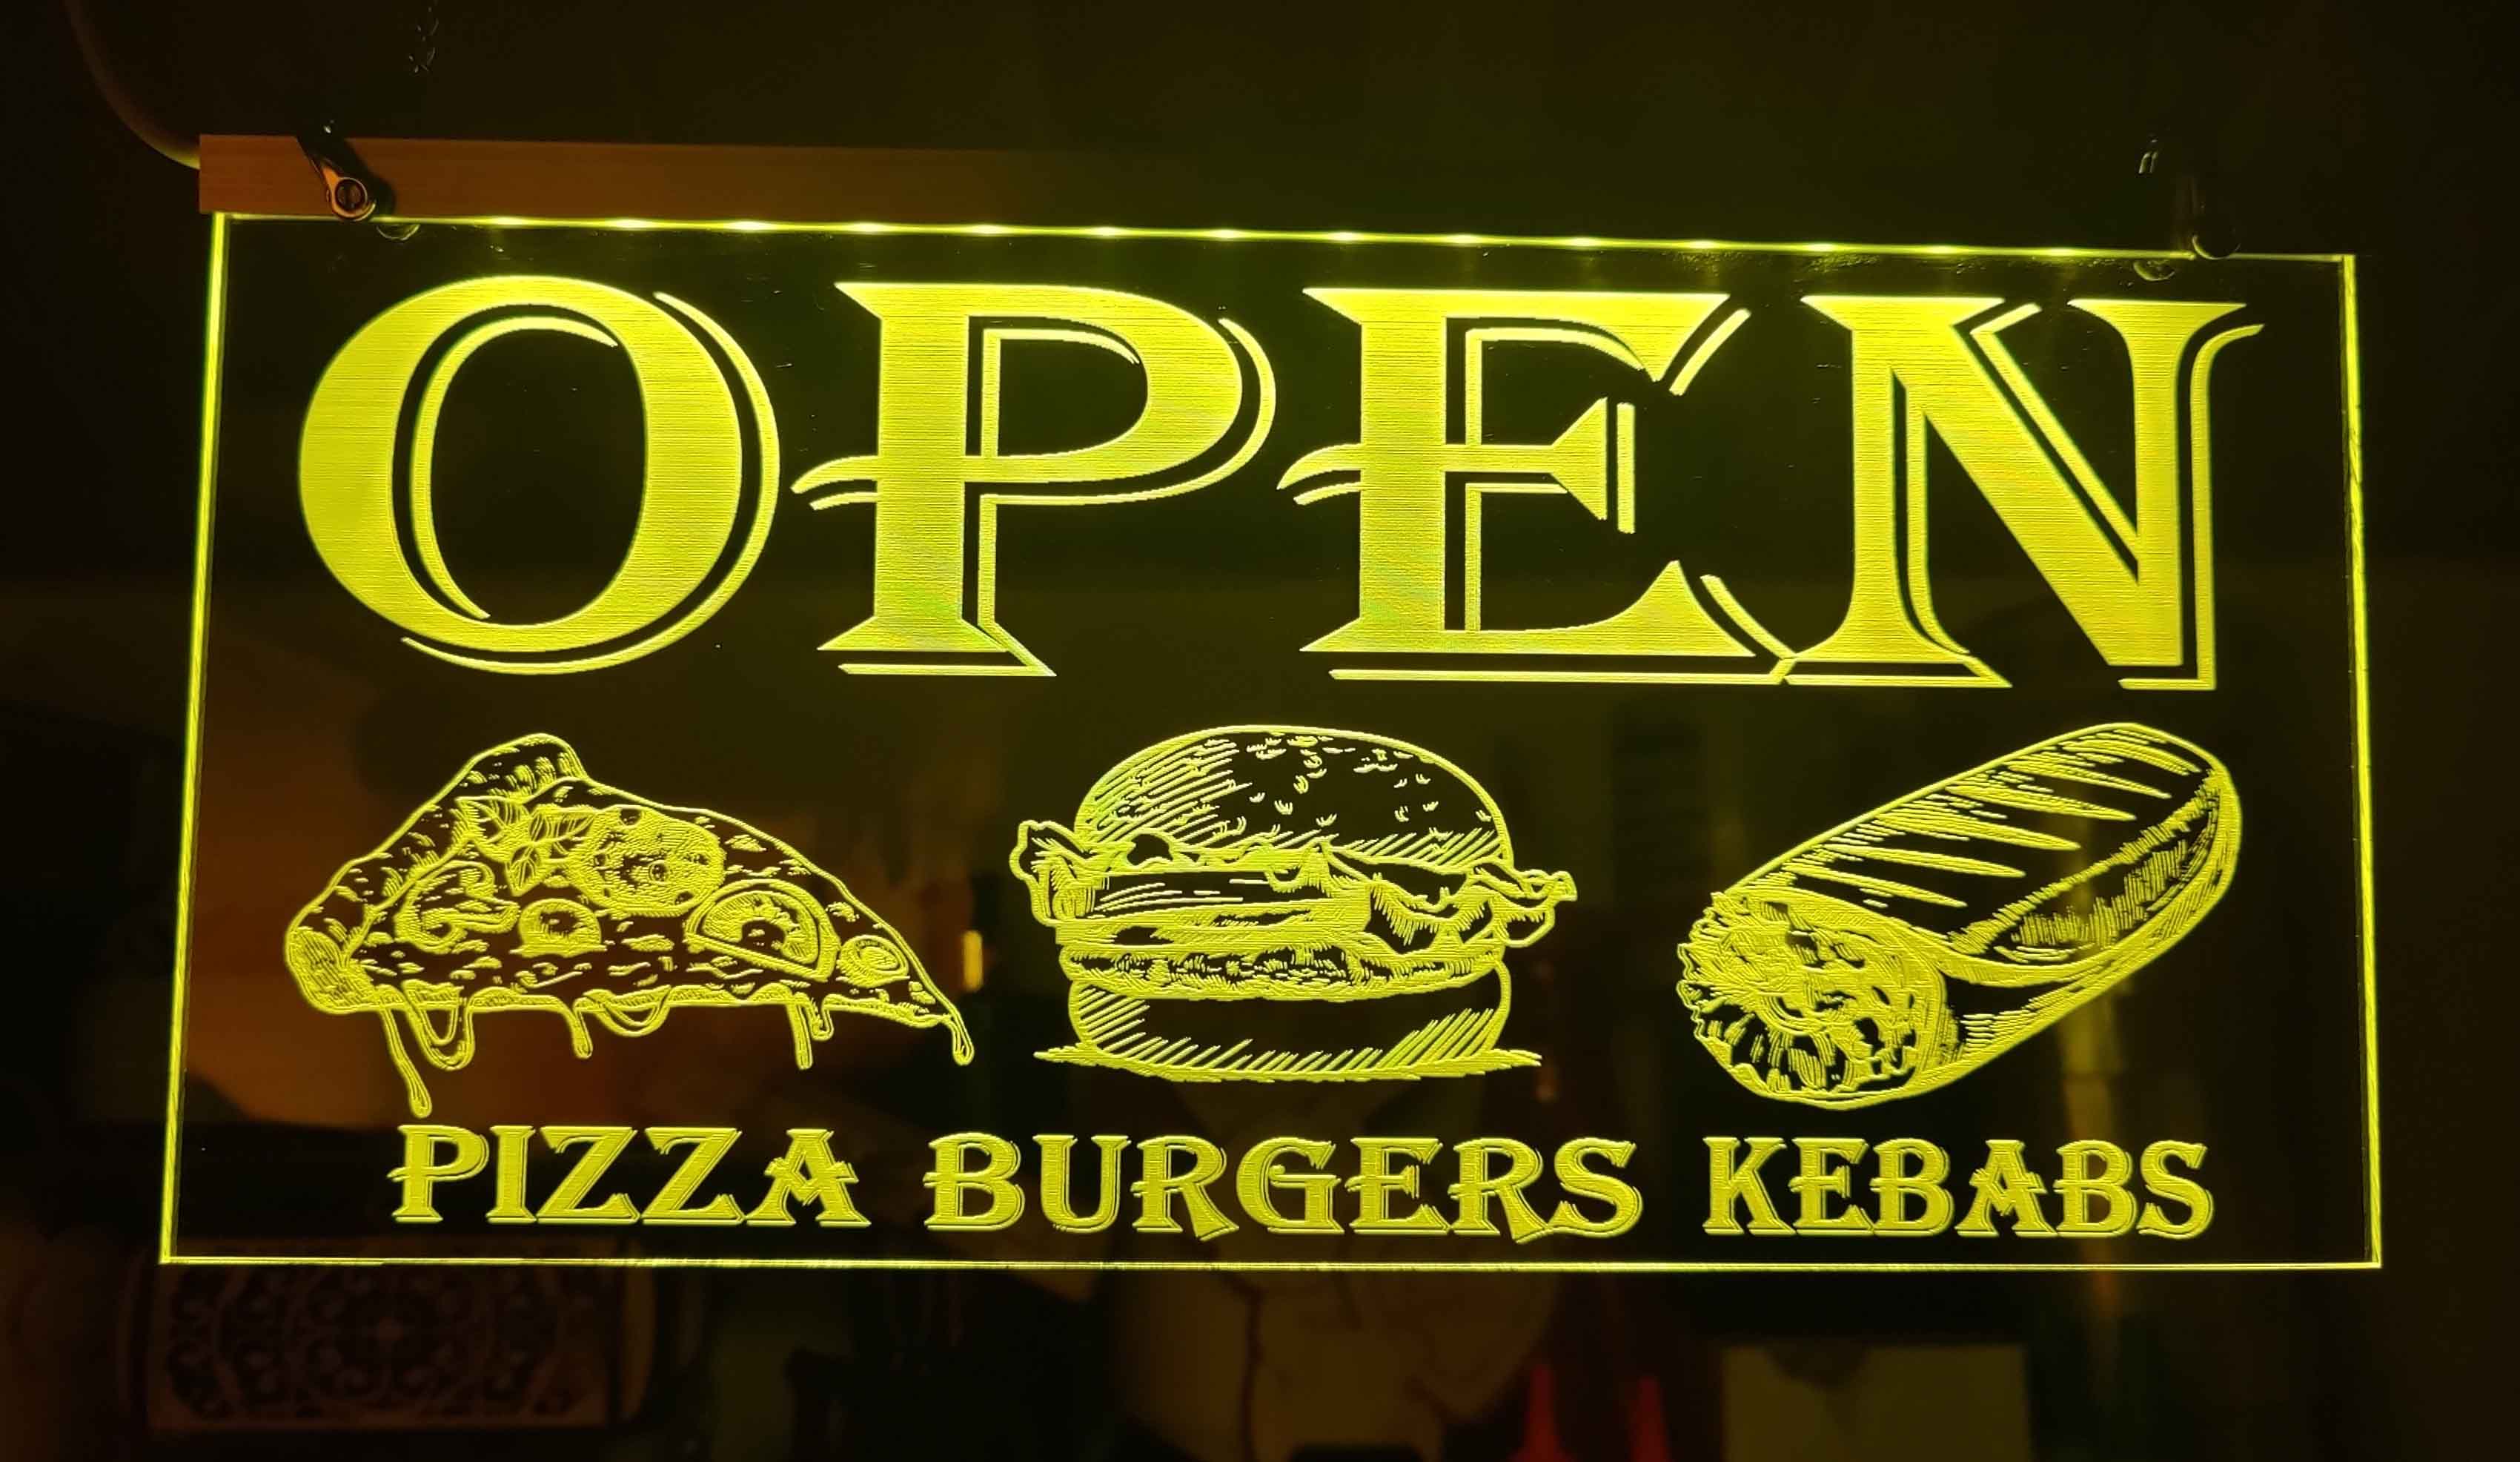 open led sign with pizza burgers and kebabs engraved